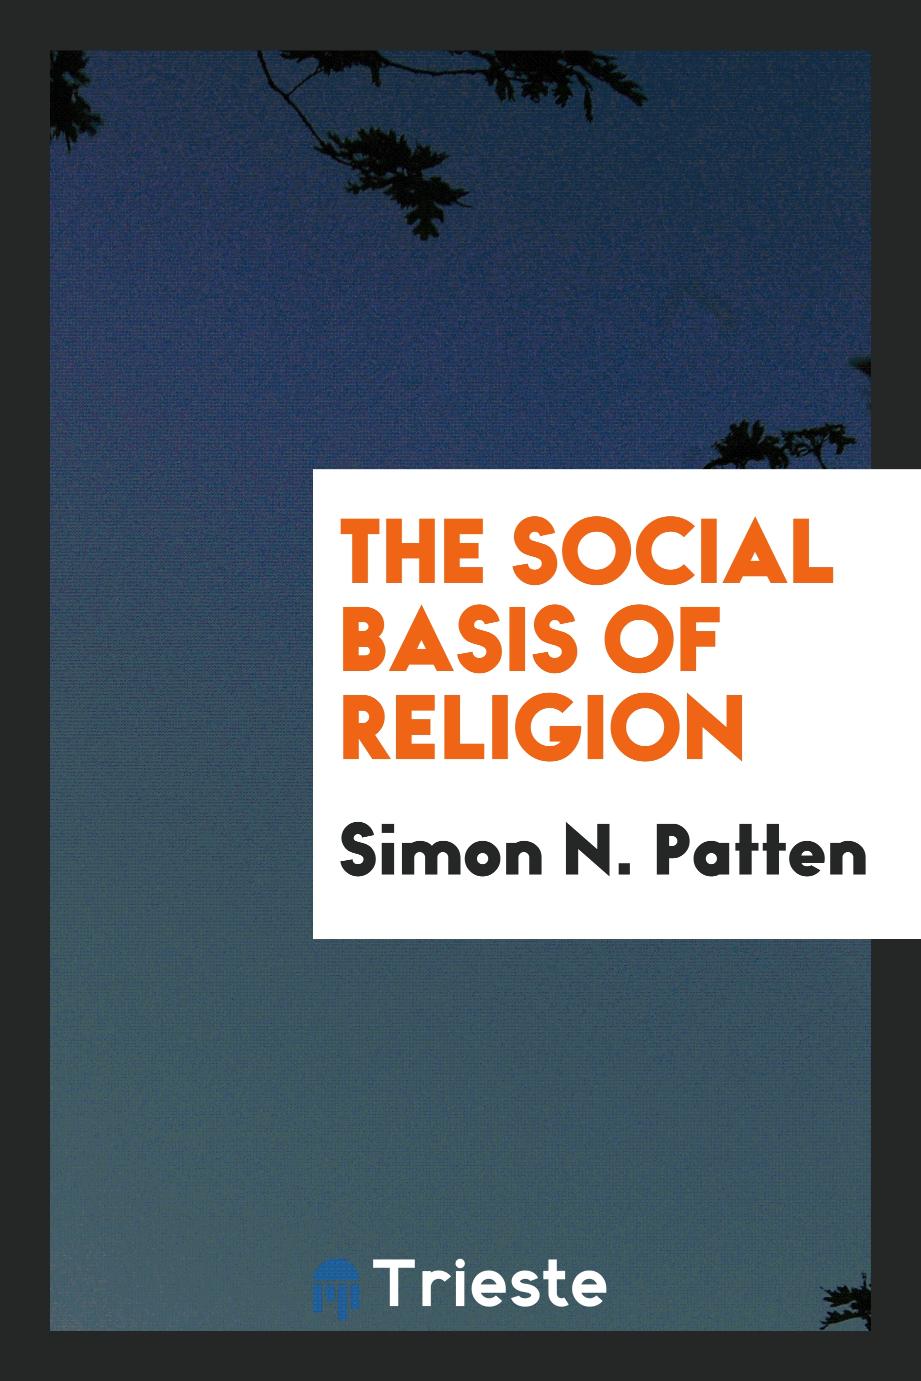 The social basis of religion